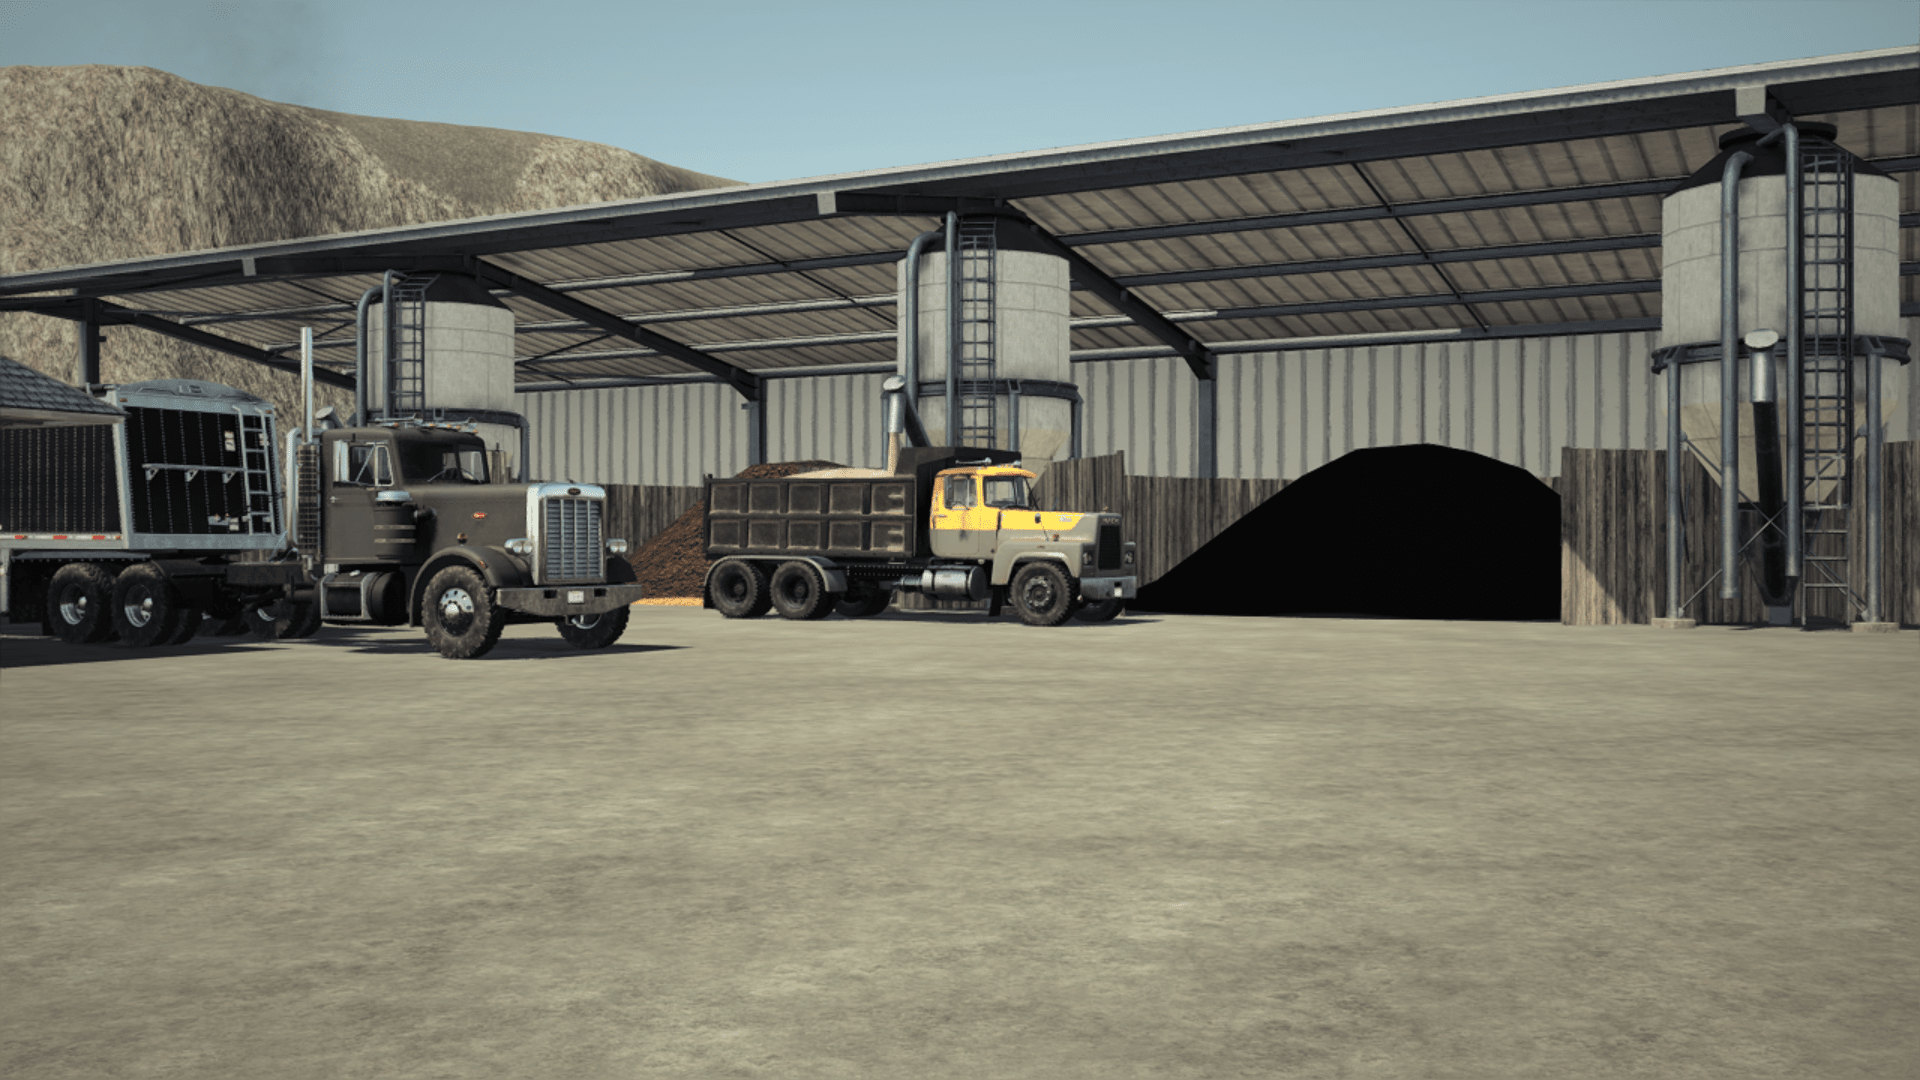 FS22 Material Production Facilities